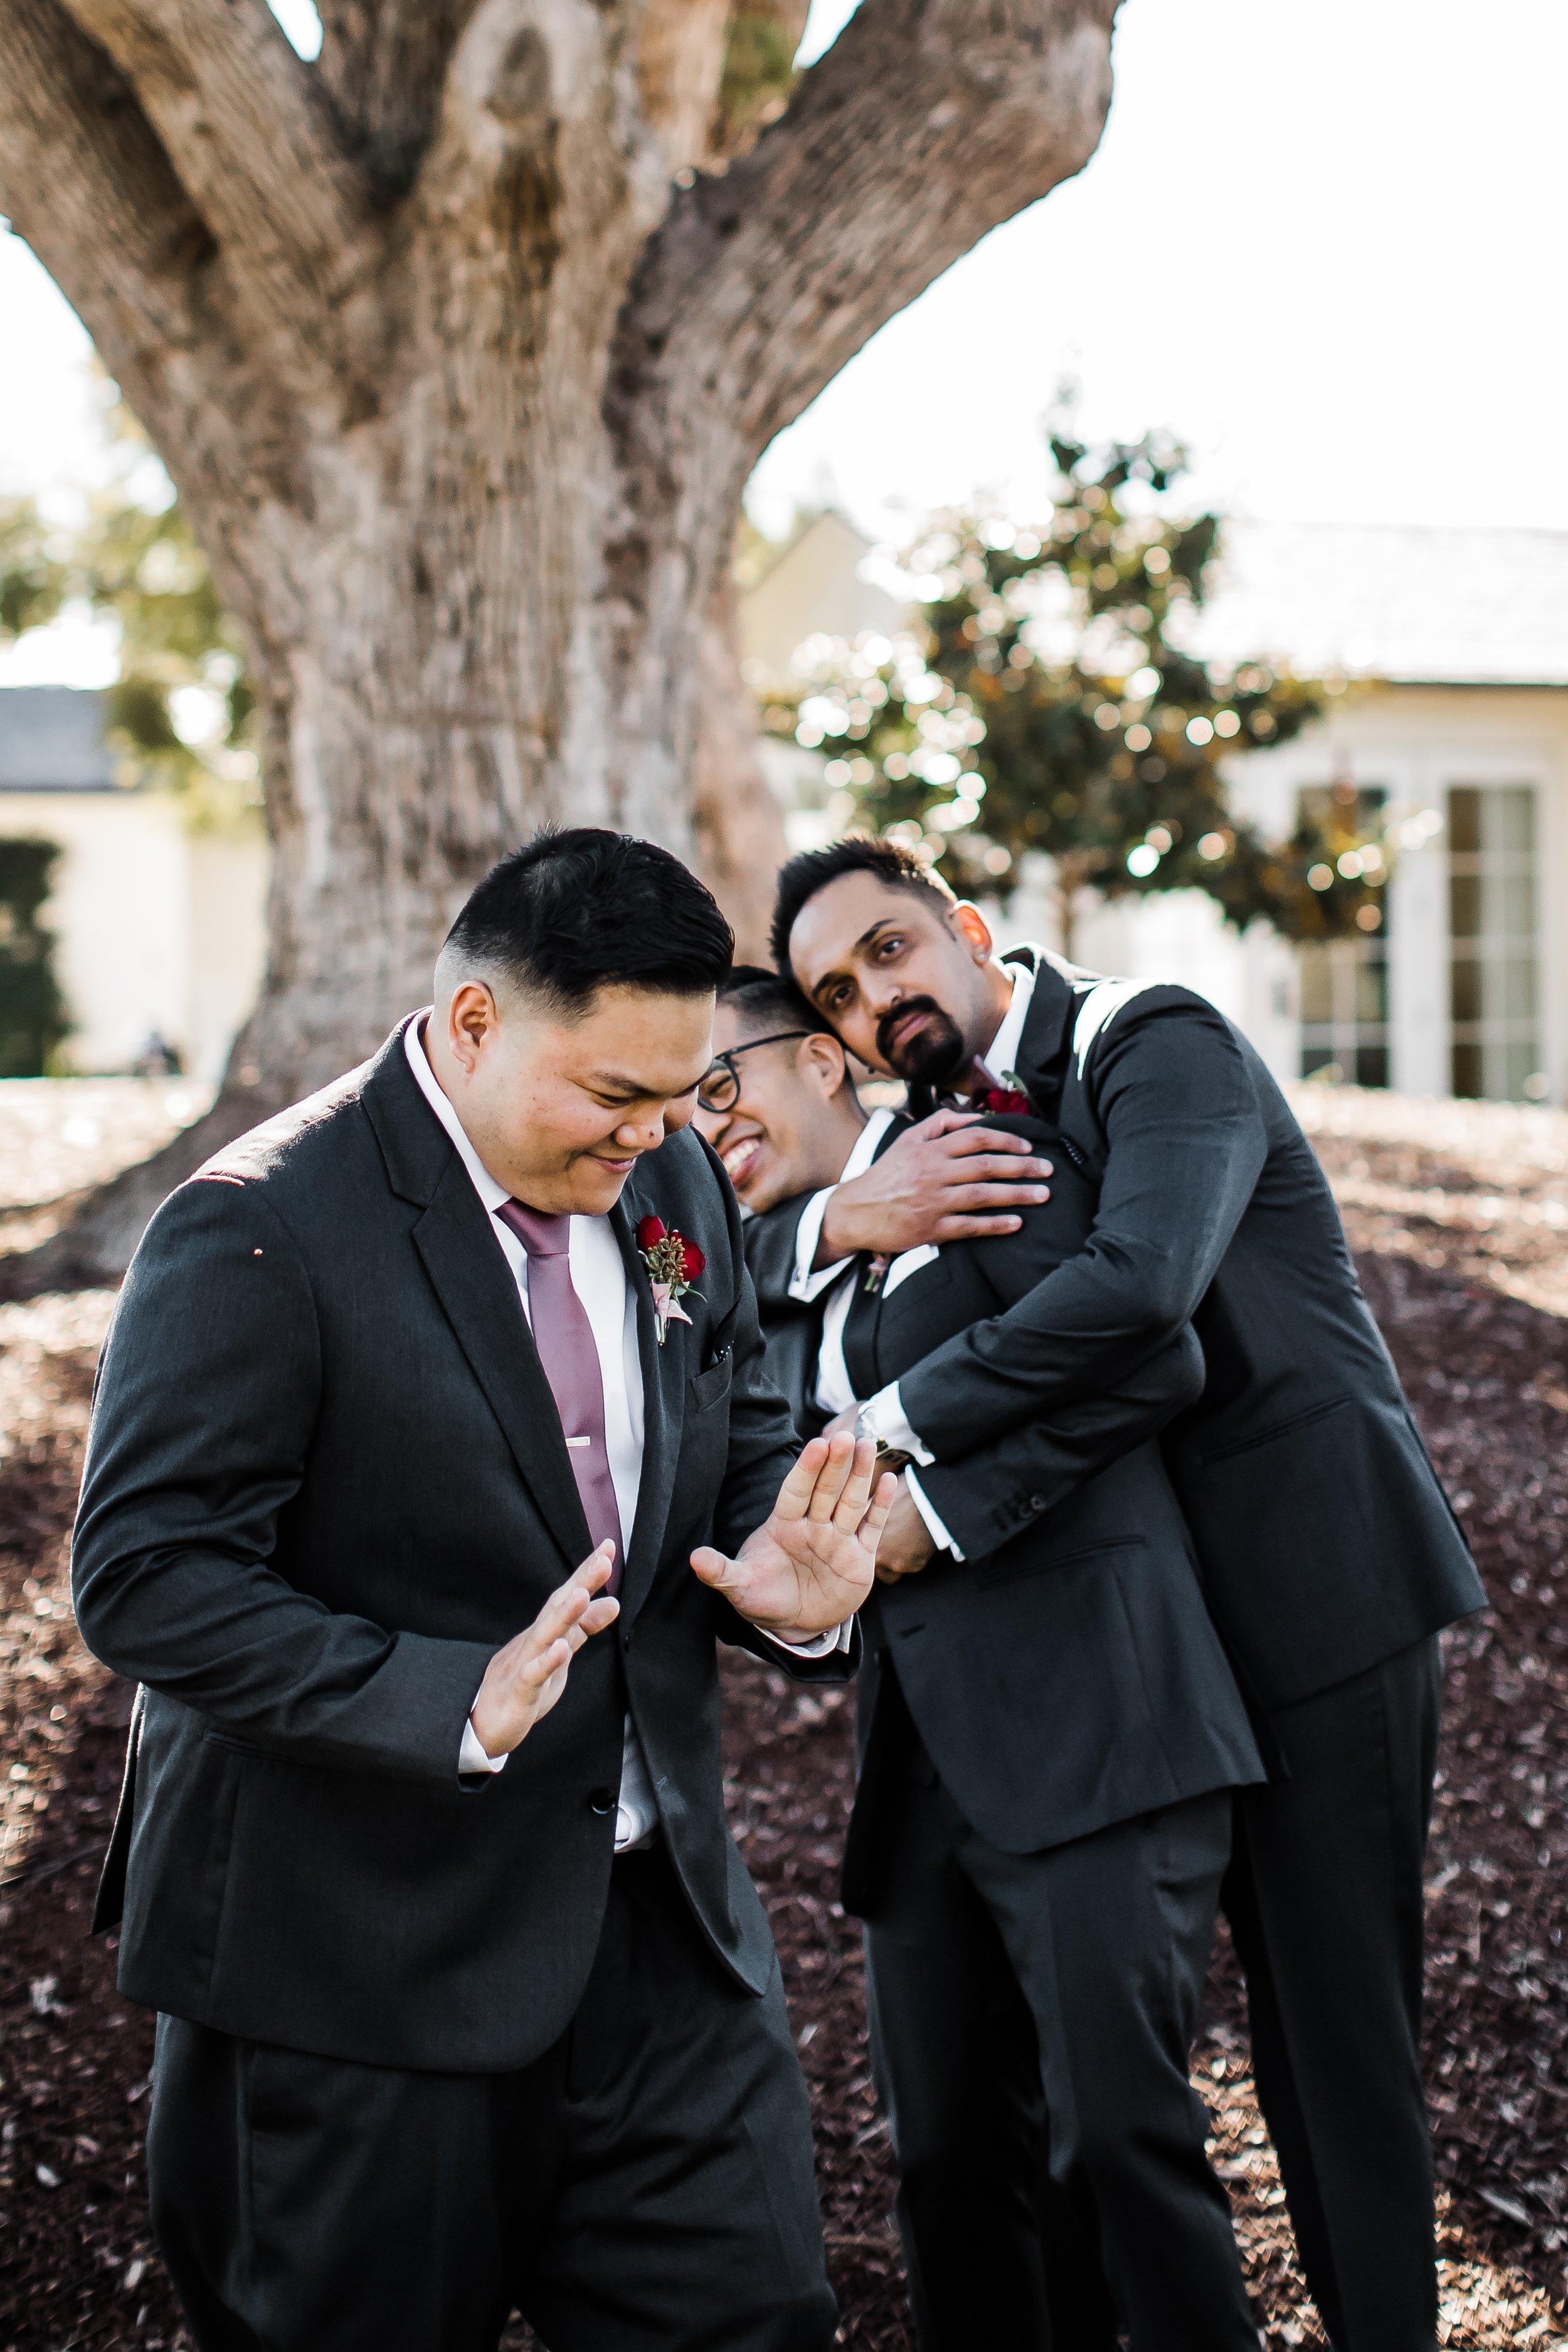 www.santabarbarawedding.com | Old Mission SB | Events by Maxi | Michelle Ramirez | Tangled Lotus | Groom with a Couple Groomsmen